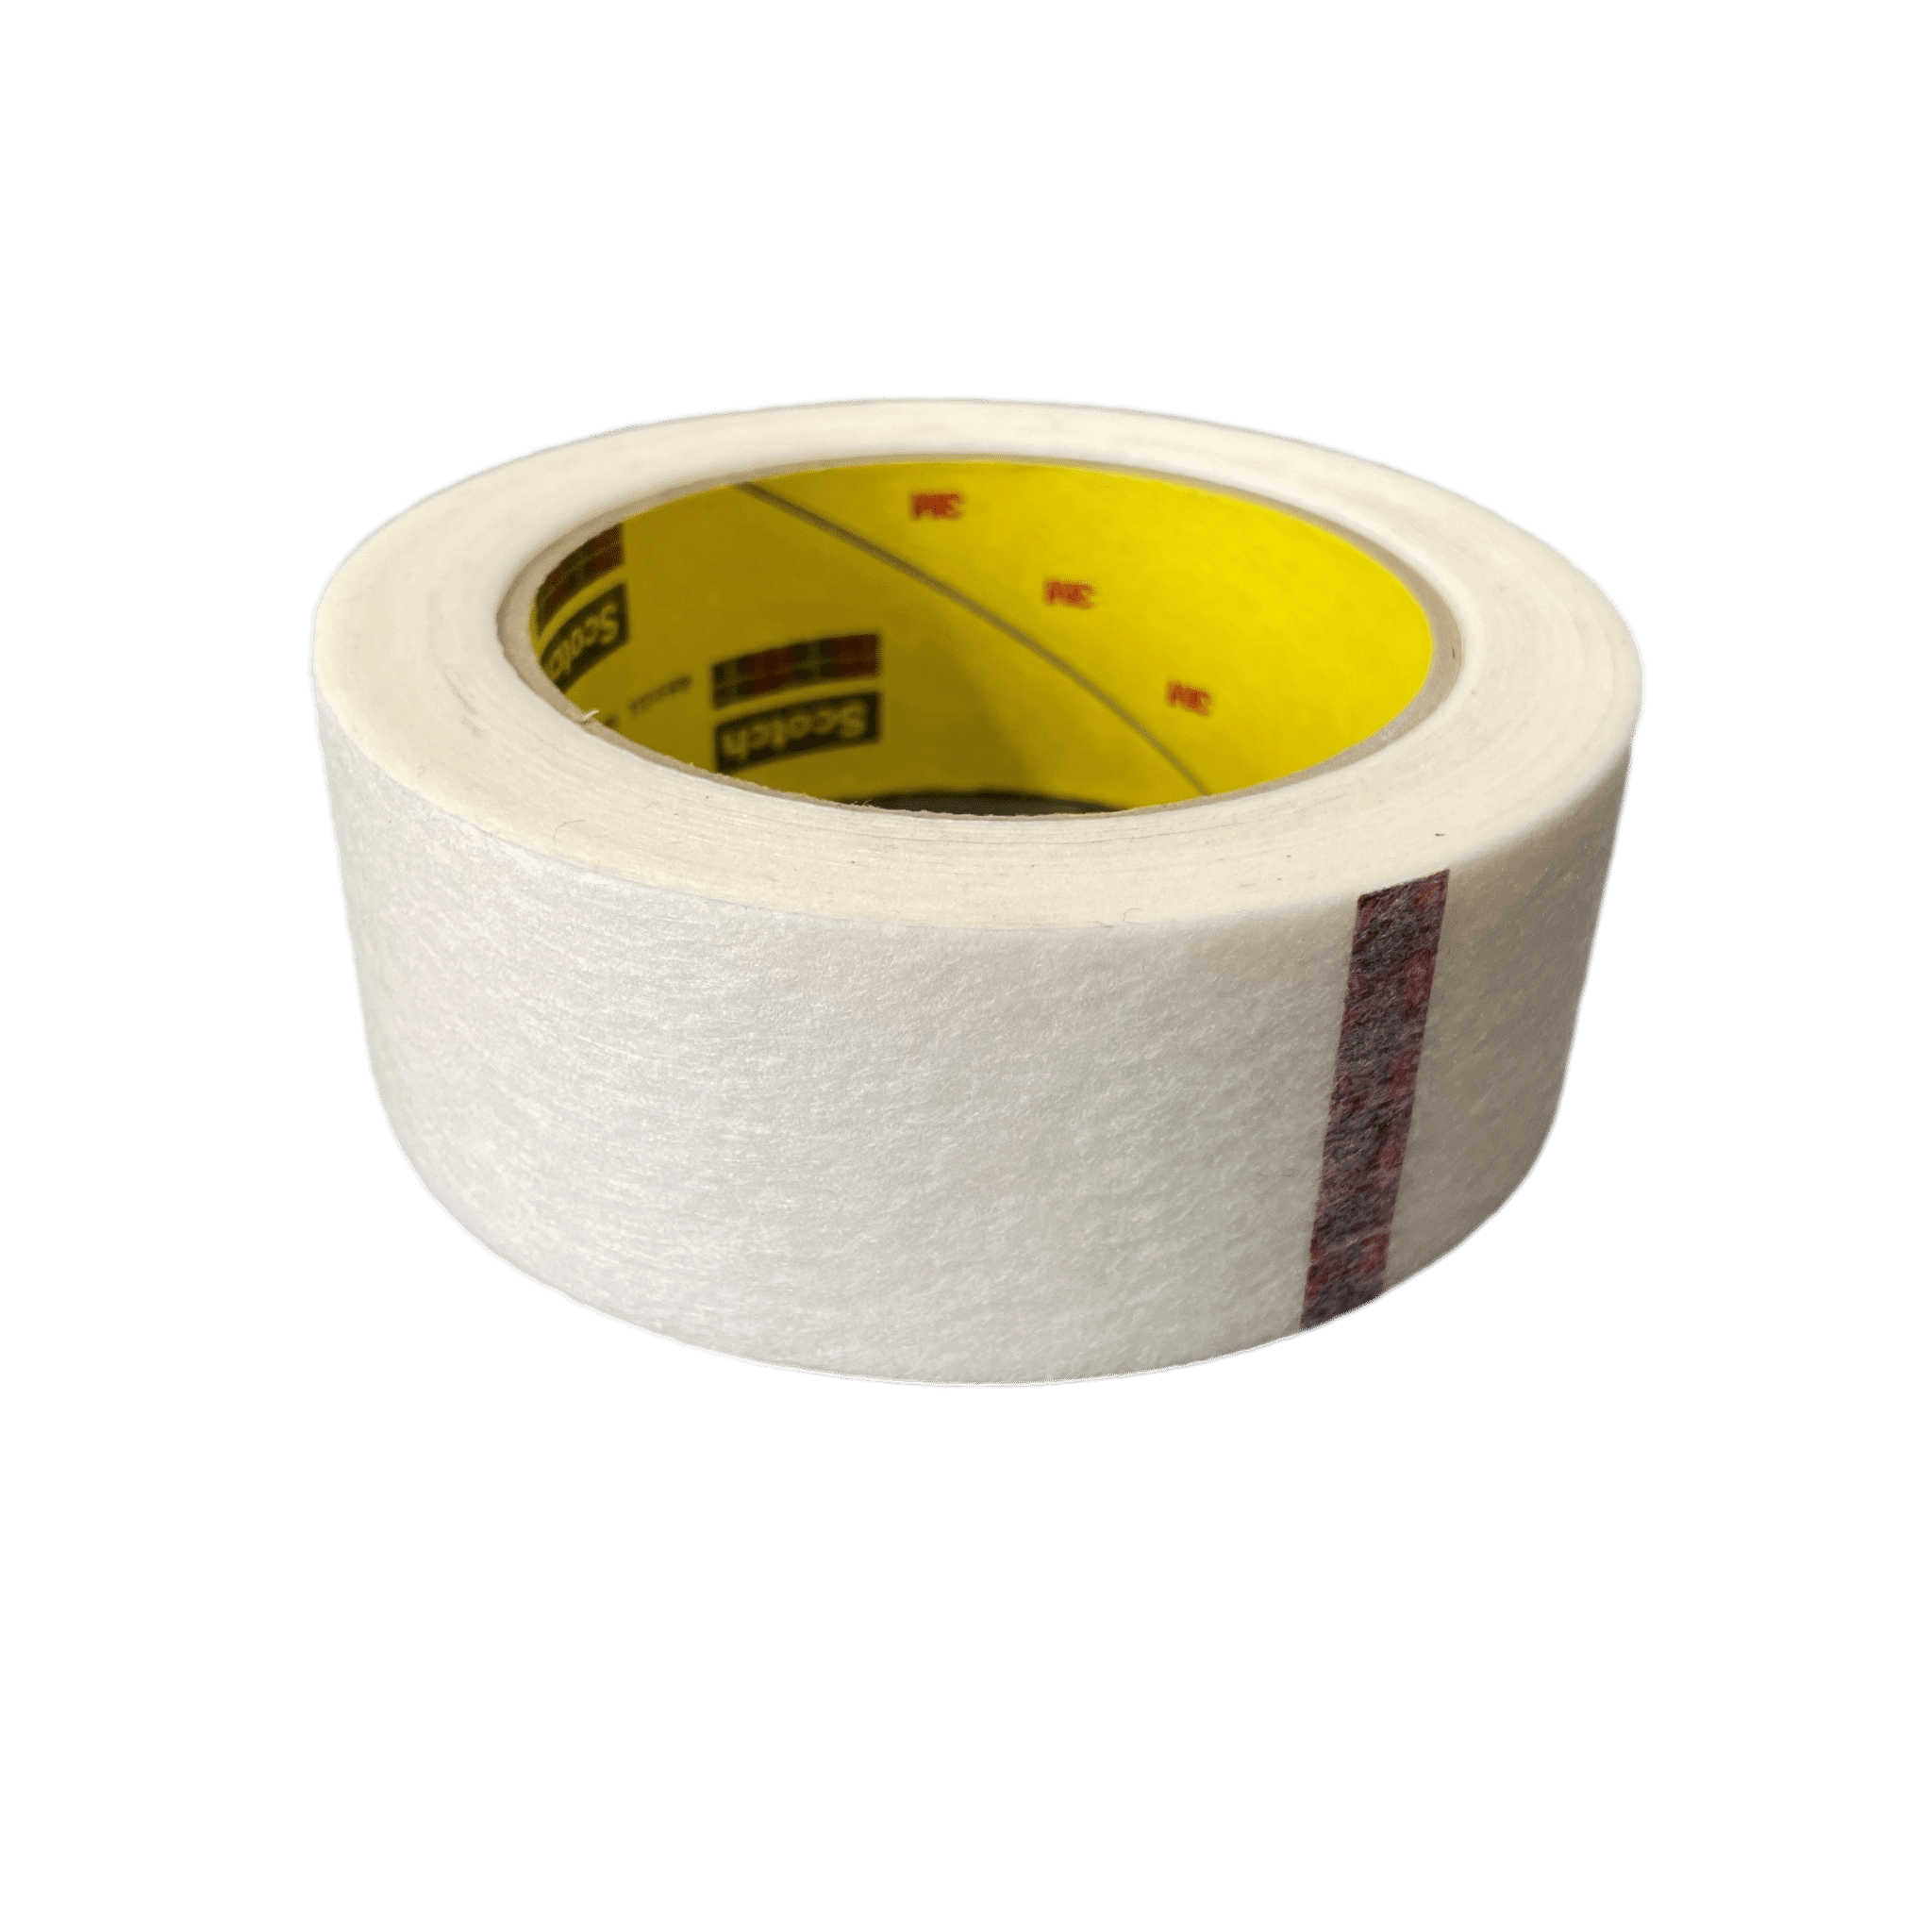 White Breathable Polycarbonate Seal Tape 1.5 in. x 108 ft.